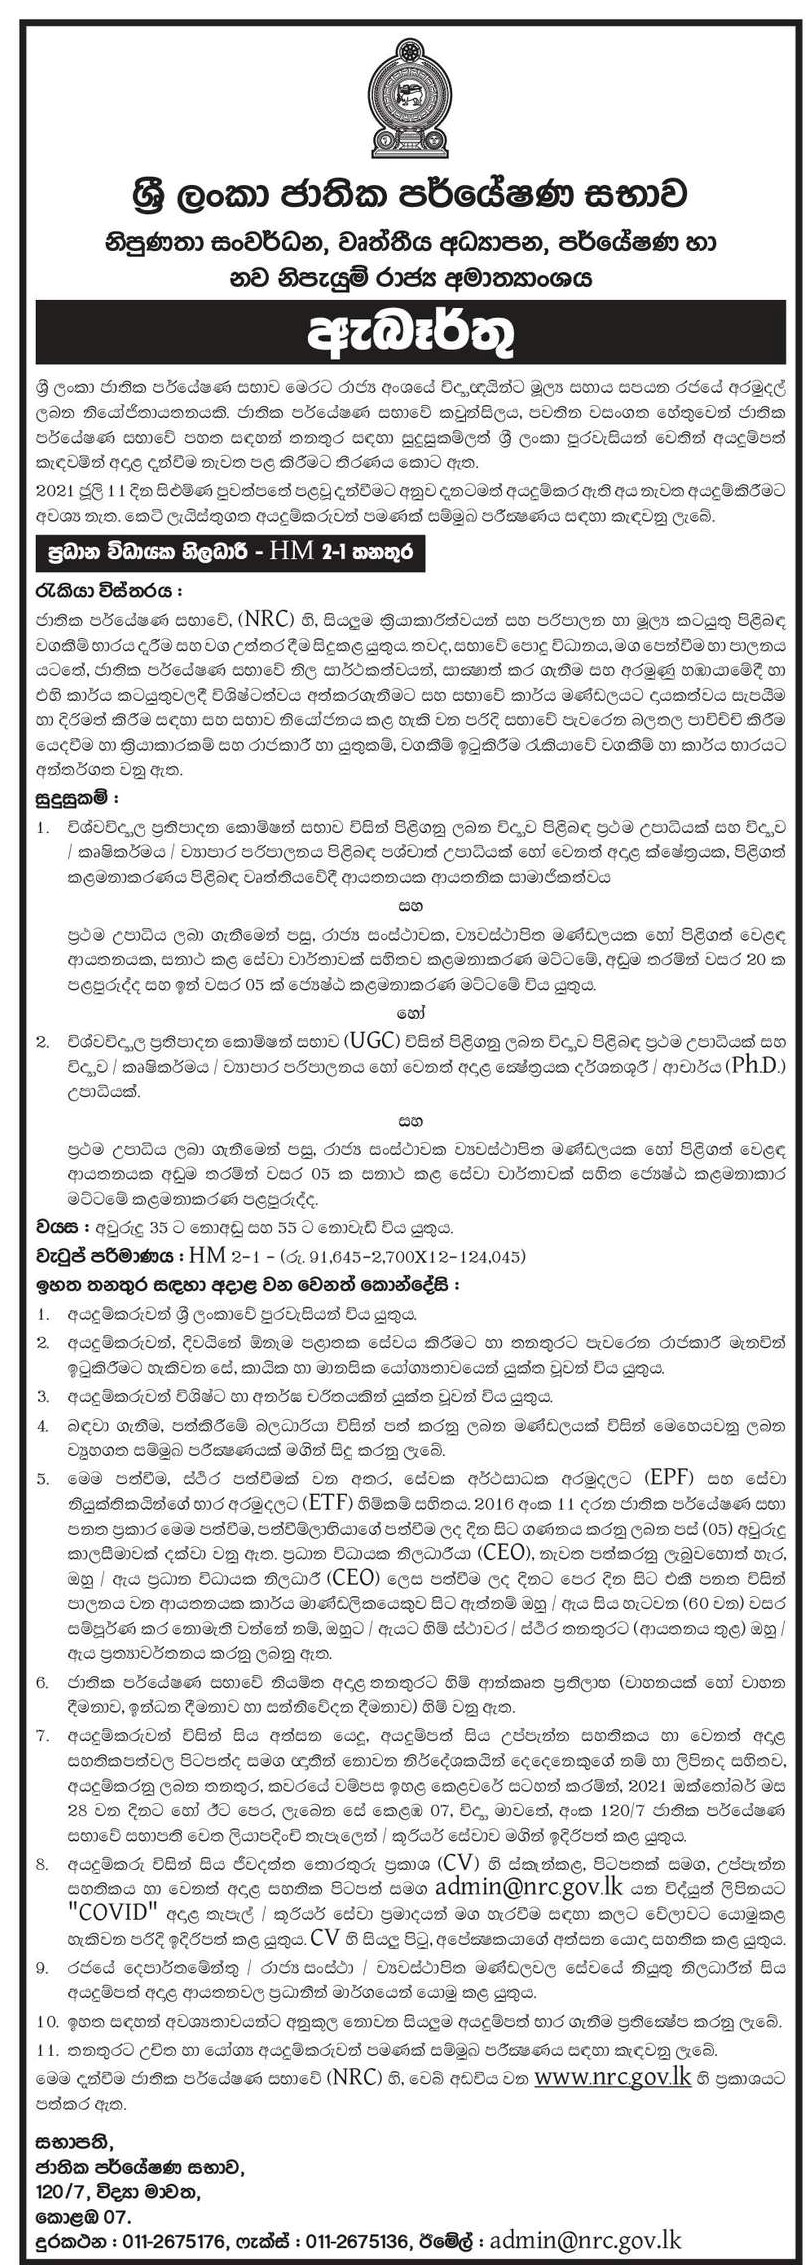 Chief Executive Officer Job in National Research Council of Sri Lanka